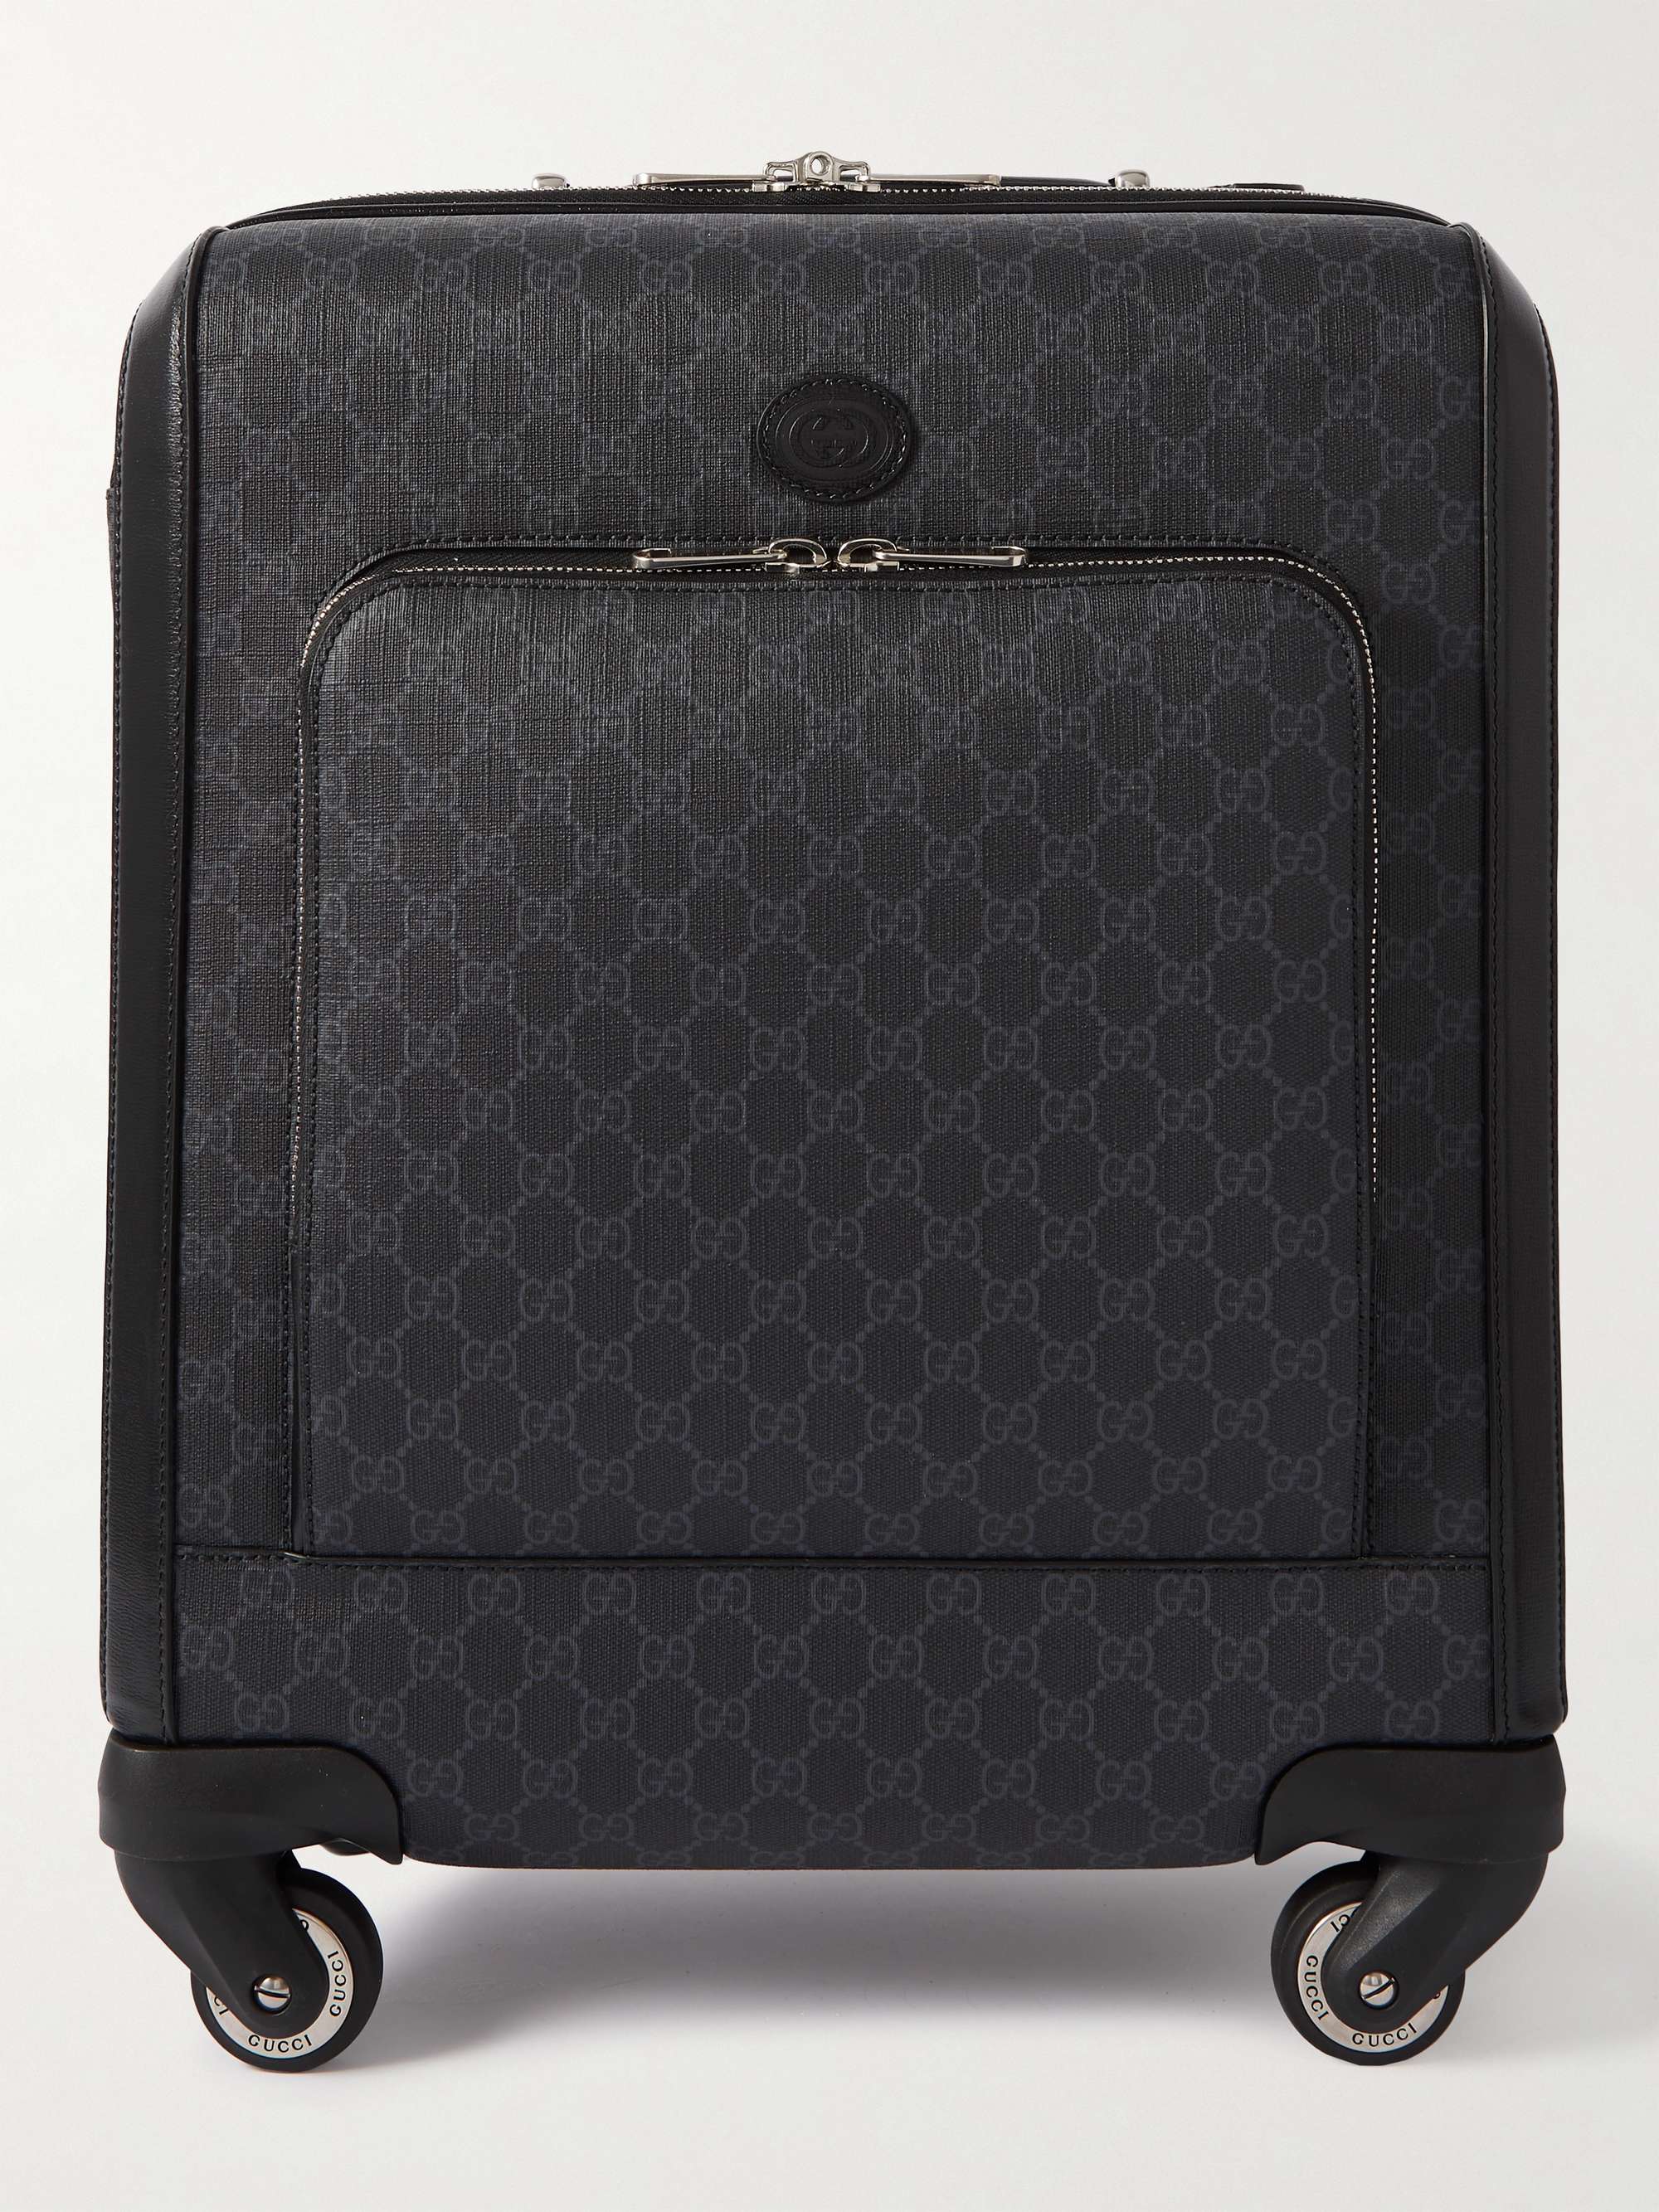 GUCCI Leather-Trimmed Monogrammed Canvas Carry-On Suitcase for Men